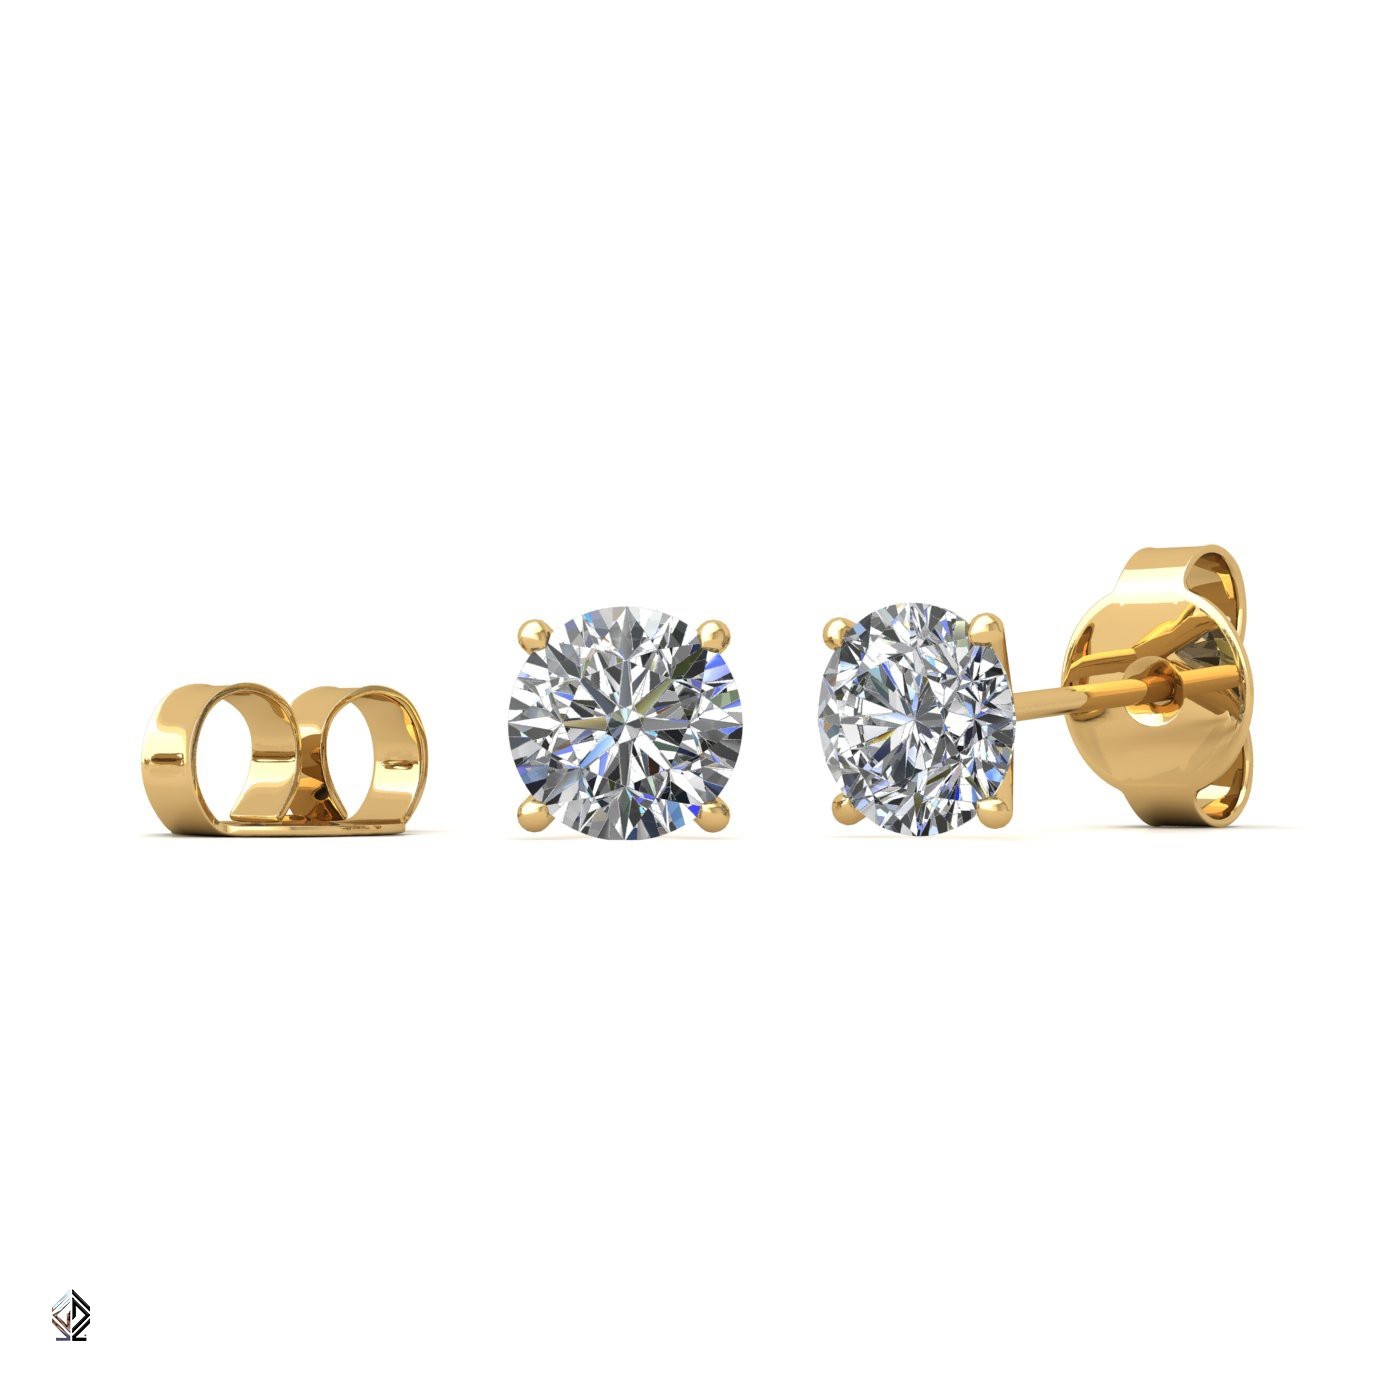 18k yellow gold 0,3 ct each (0,6 tcw) 4 prongs round cut classic diamond earring studs Photos & images